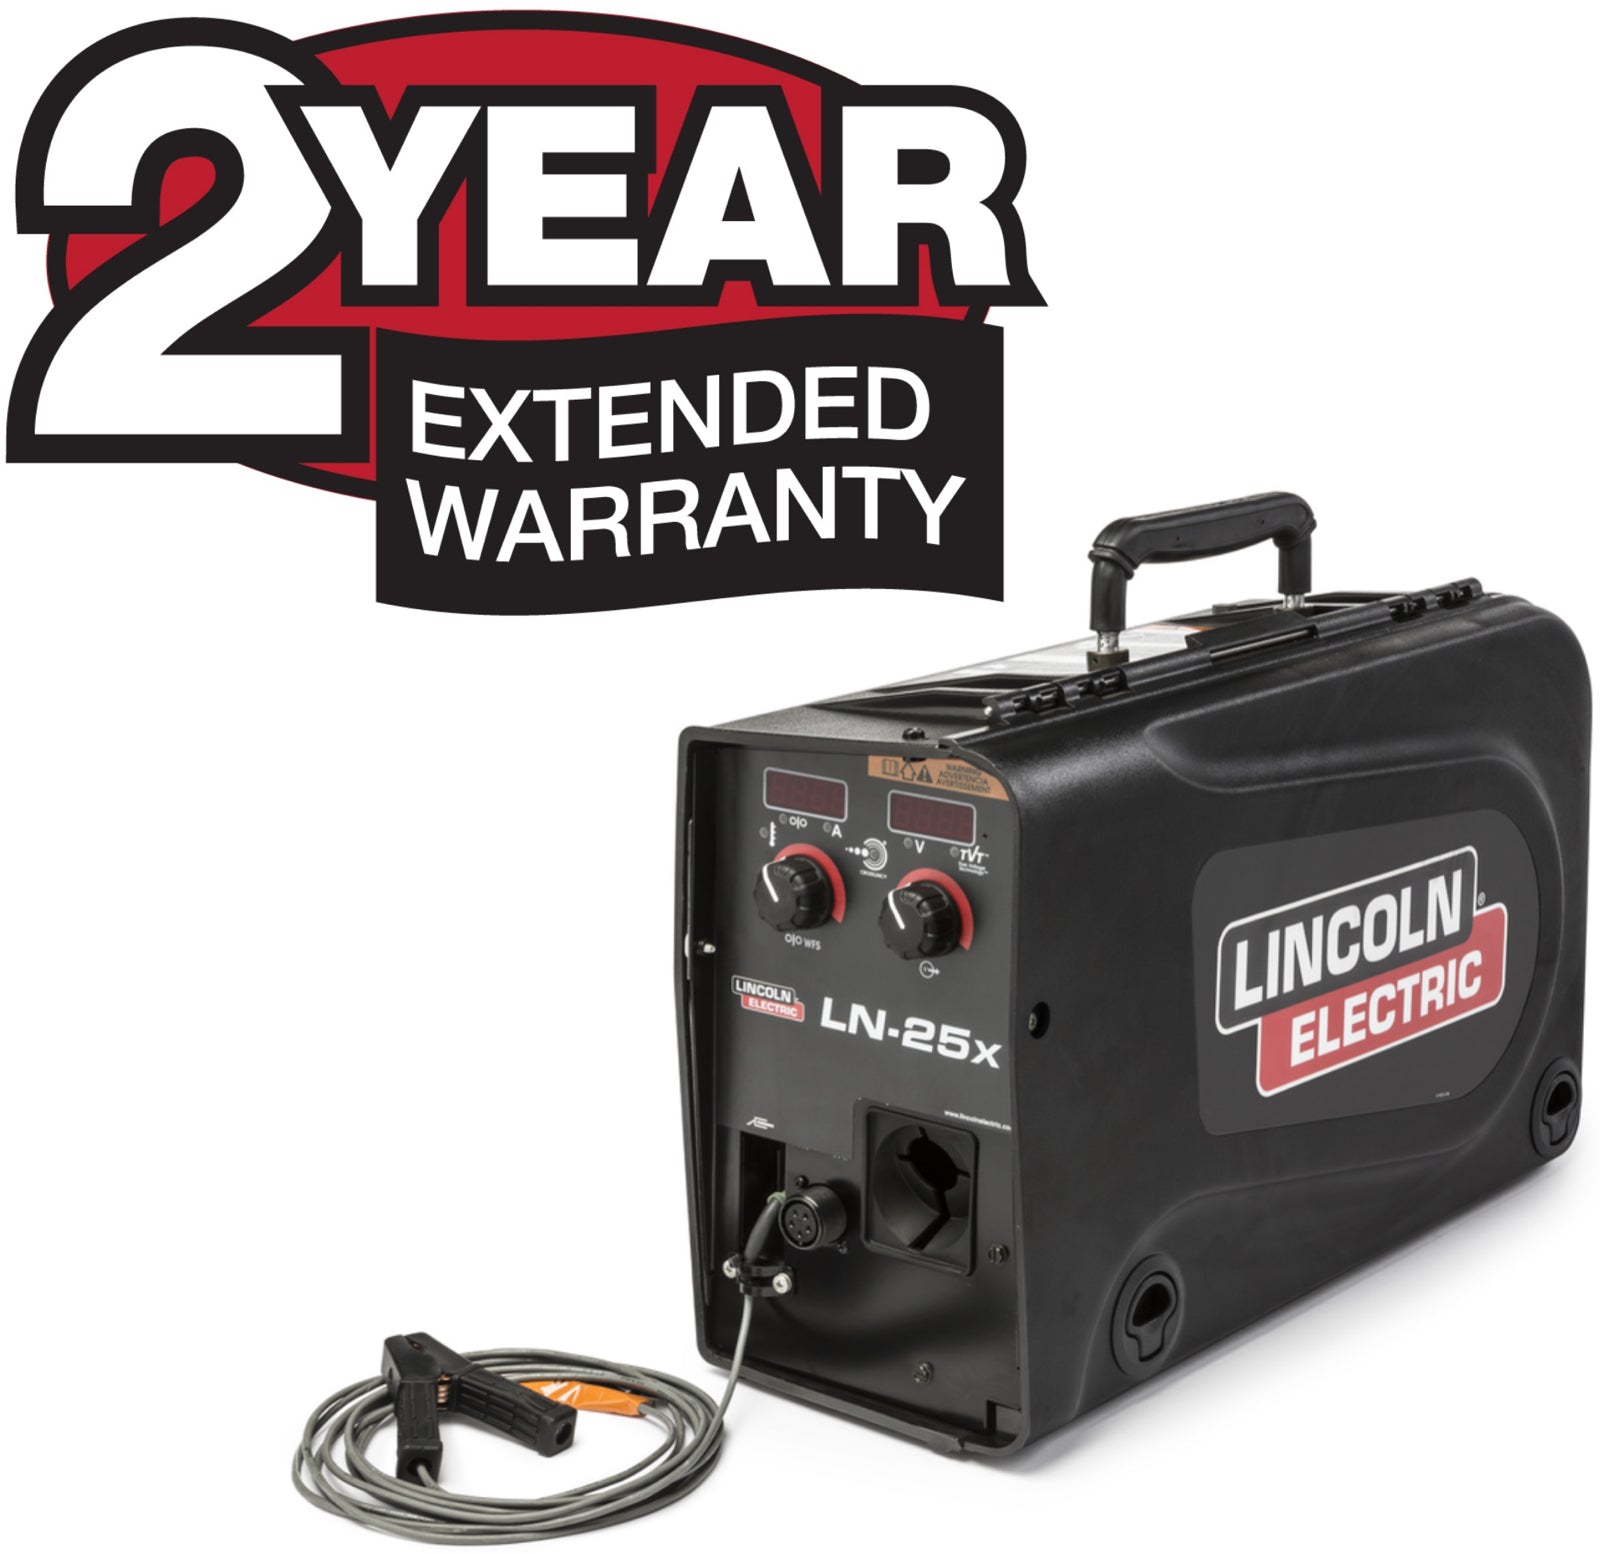 Lincoln 2-Year Extended Warranty - LN-25X X4267